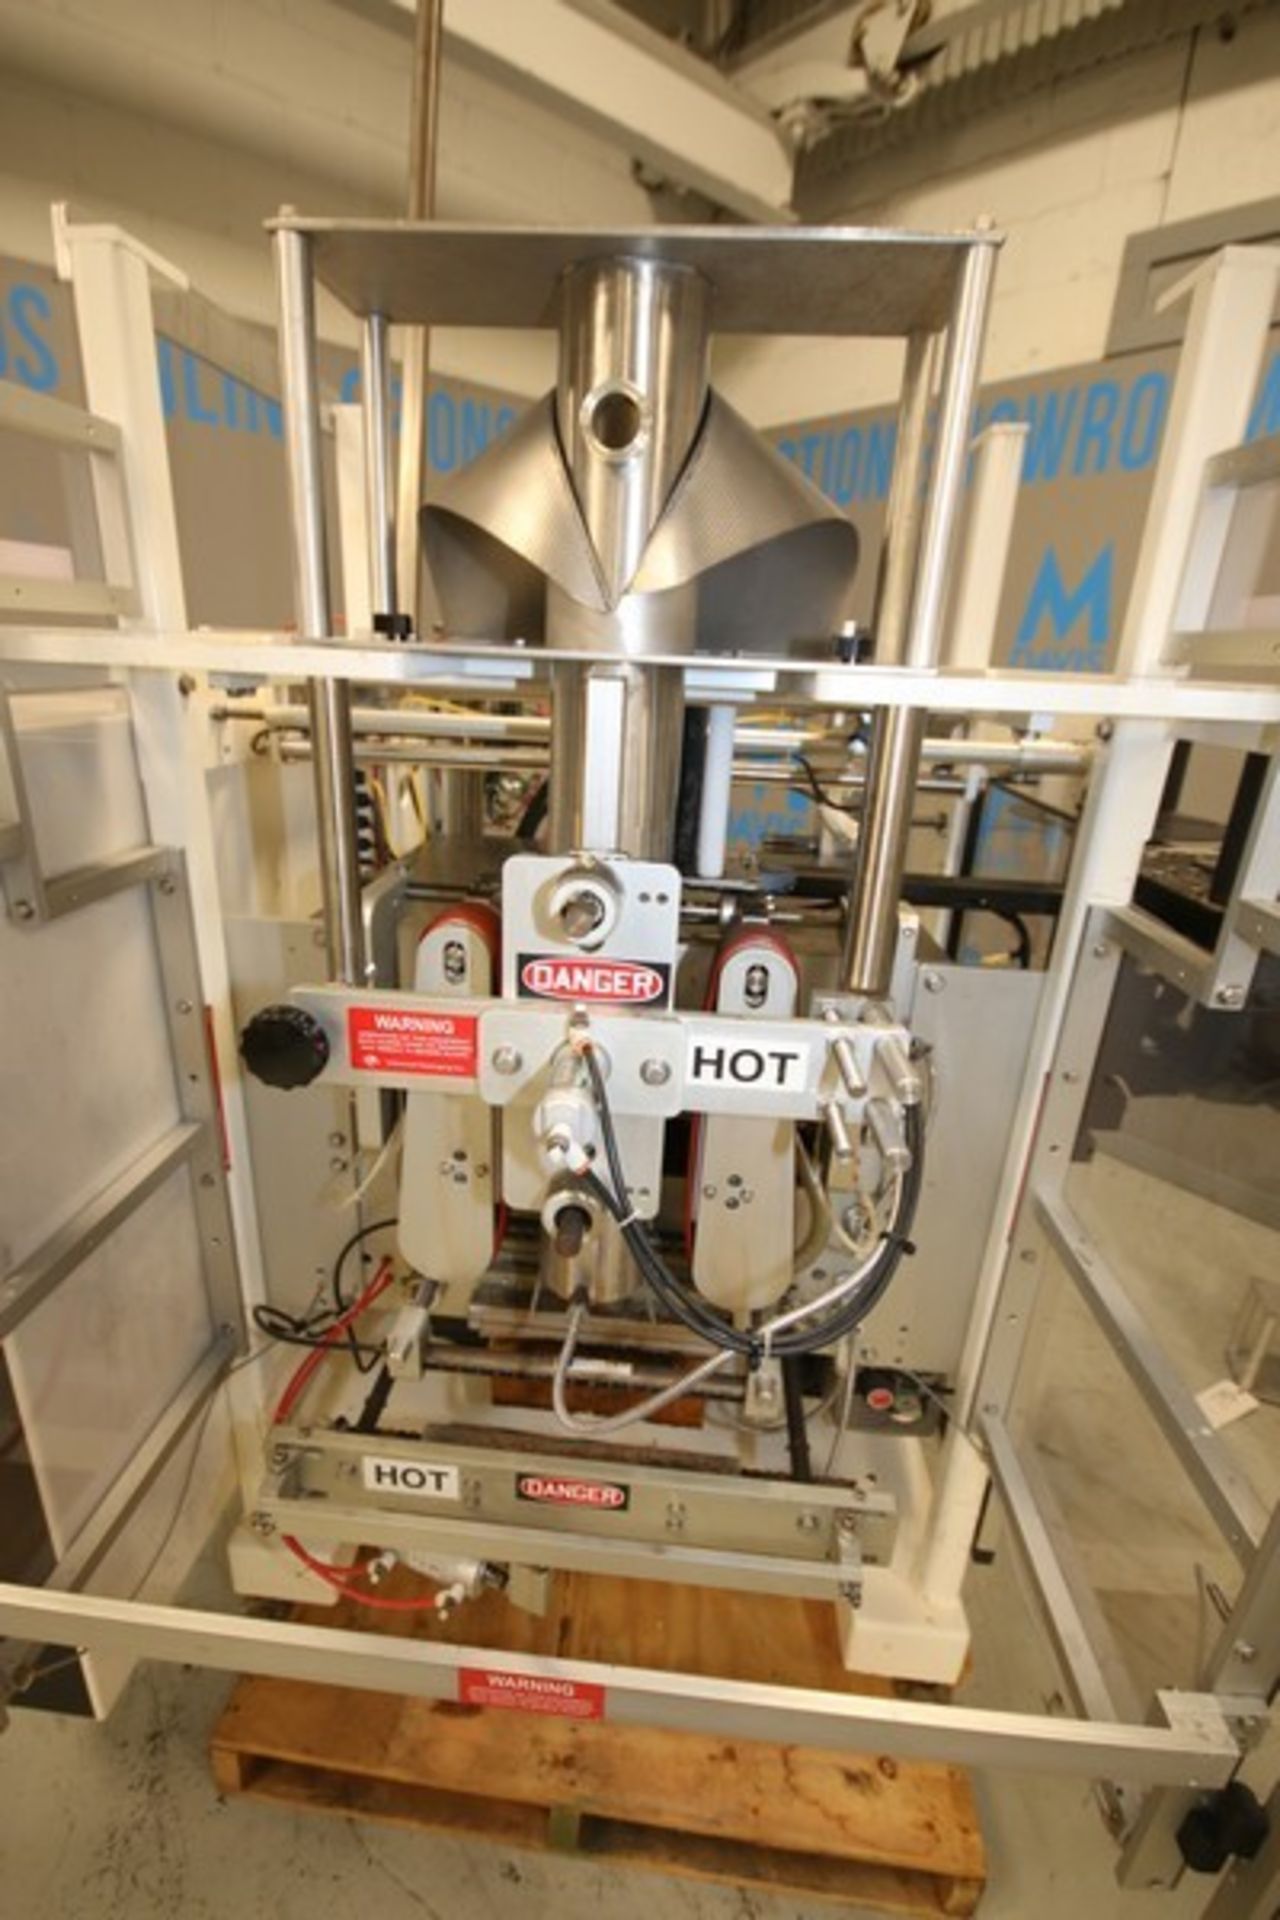 Universal Packaging Vertical Form Fill & Seal Packaging Machine (VFFS), Model S2000C, SN 1709, - Image 2 of 12